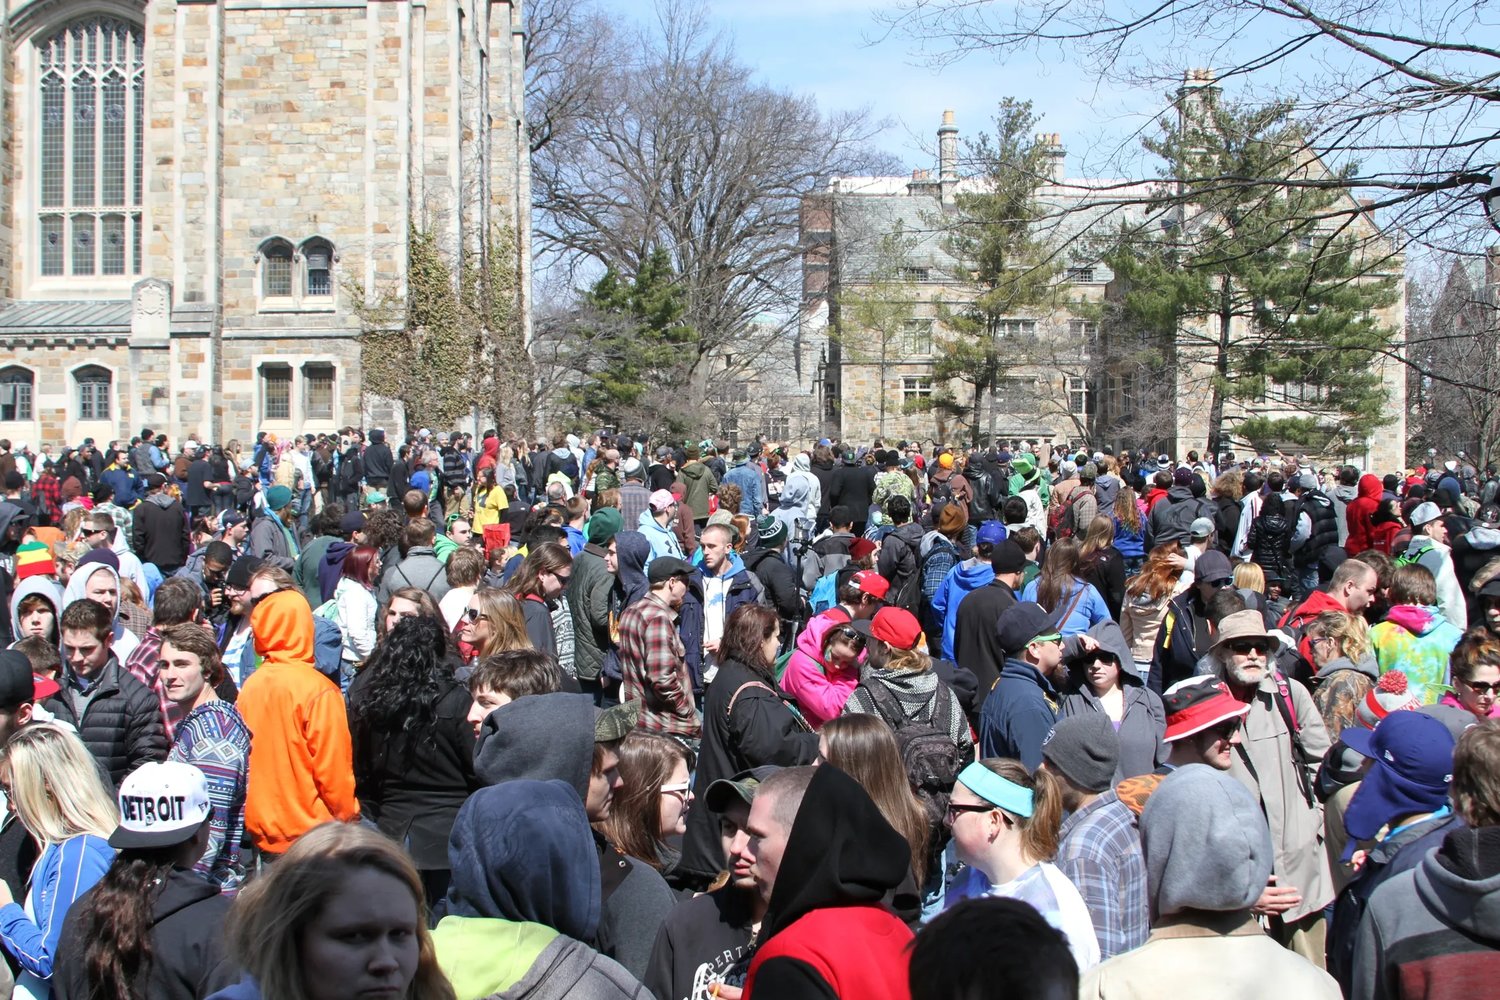 Each year, on the first Saturday in April, Michigan stoners flock to the streets of Ann Arbor for the annual Hash Bash and Monroe Street Fair, featuring speeches, live music, booths from some of the biggest names in the cannabis industry and, of course, opportunities to light up with friends.